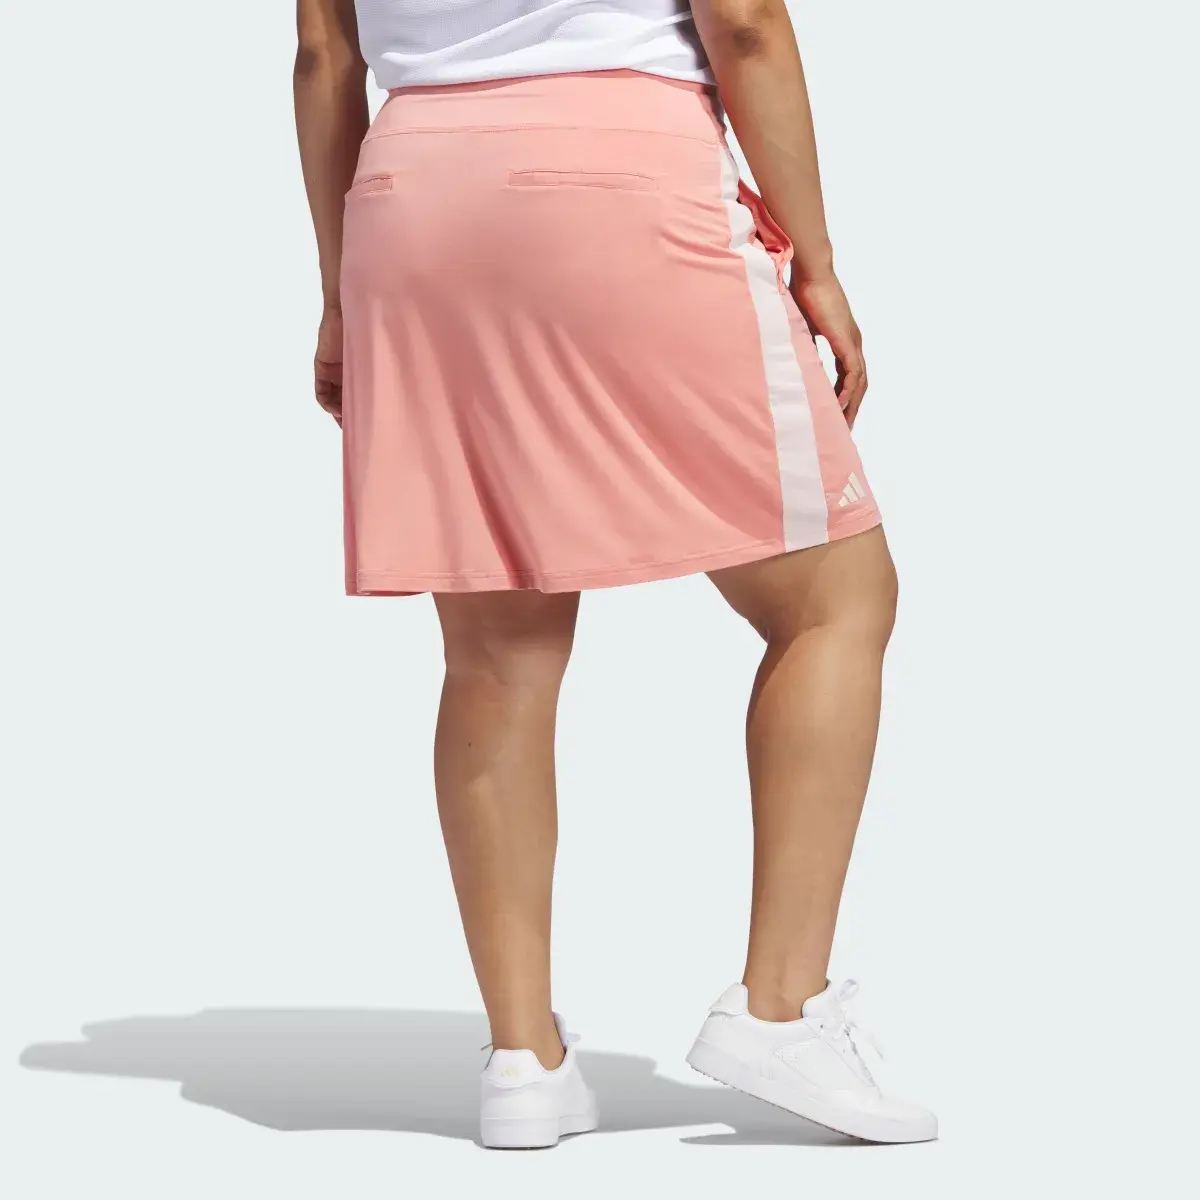 Adidas Made With Nature Golf Skirt (Plus Size). 2